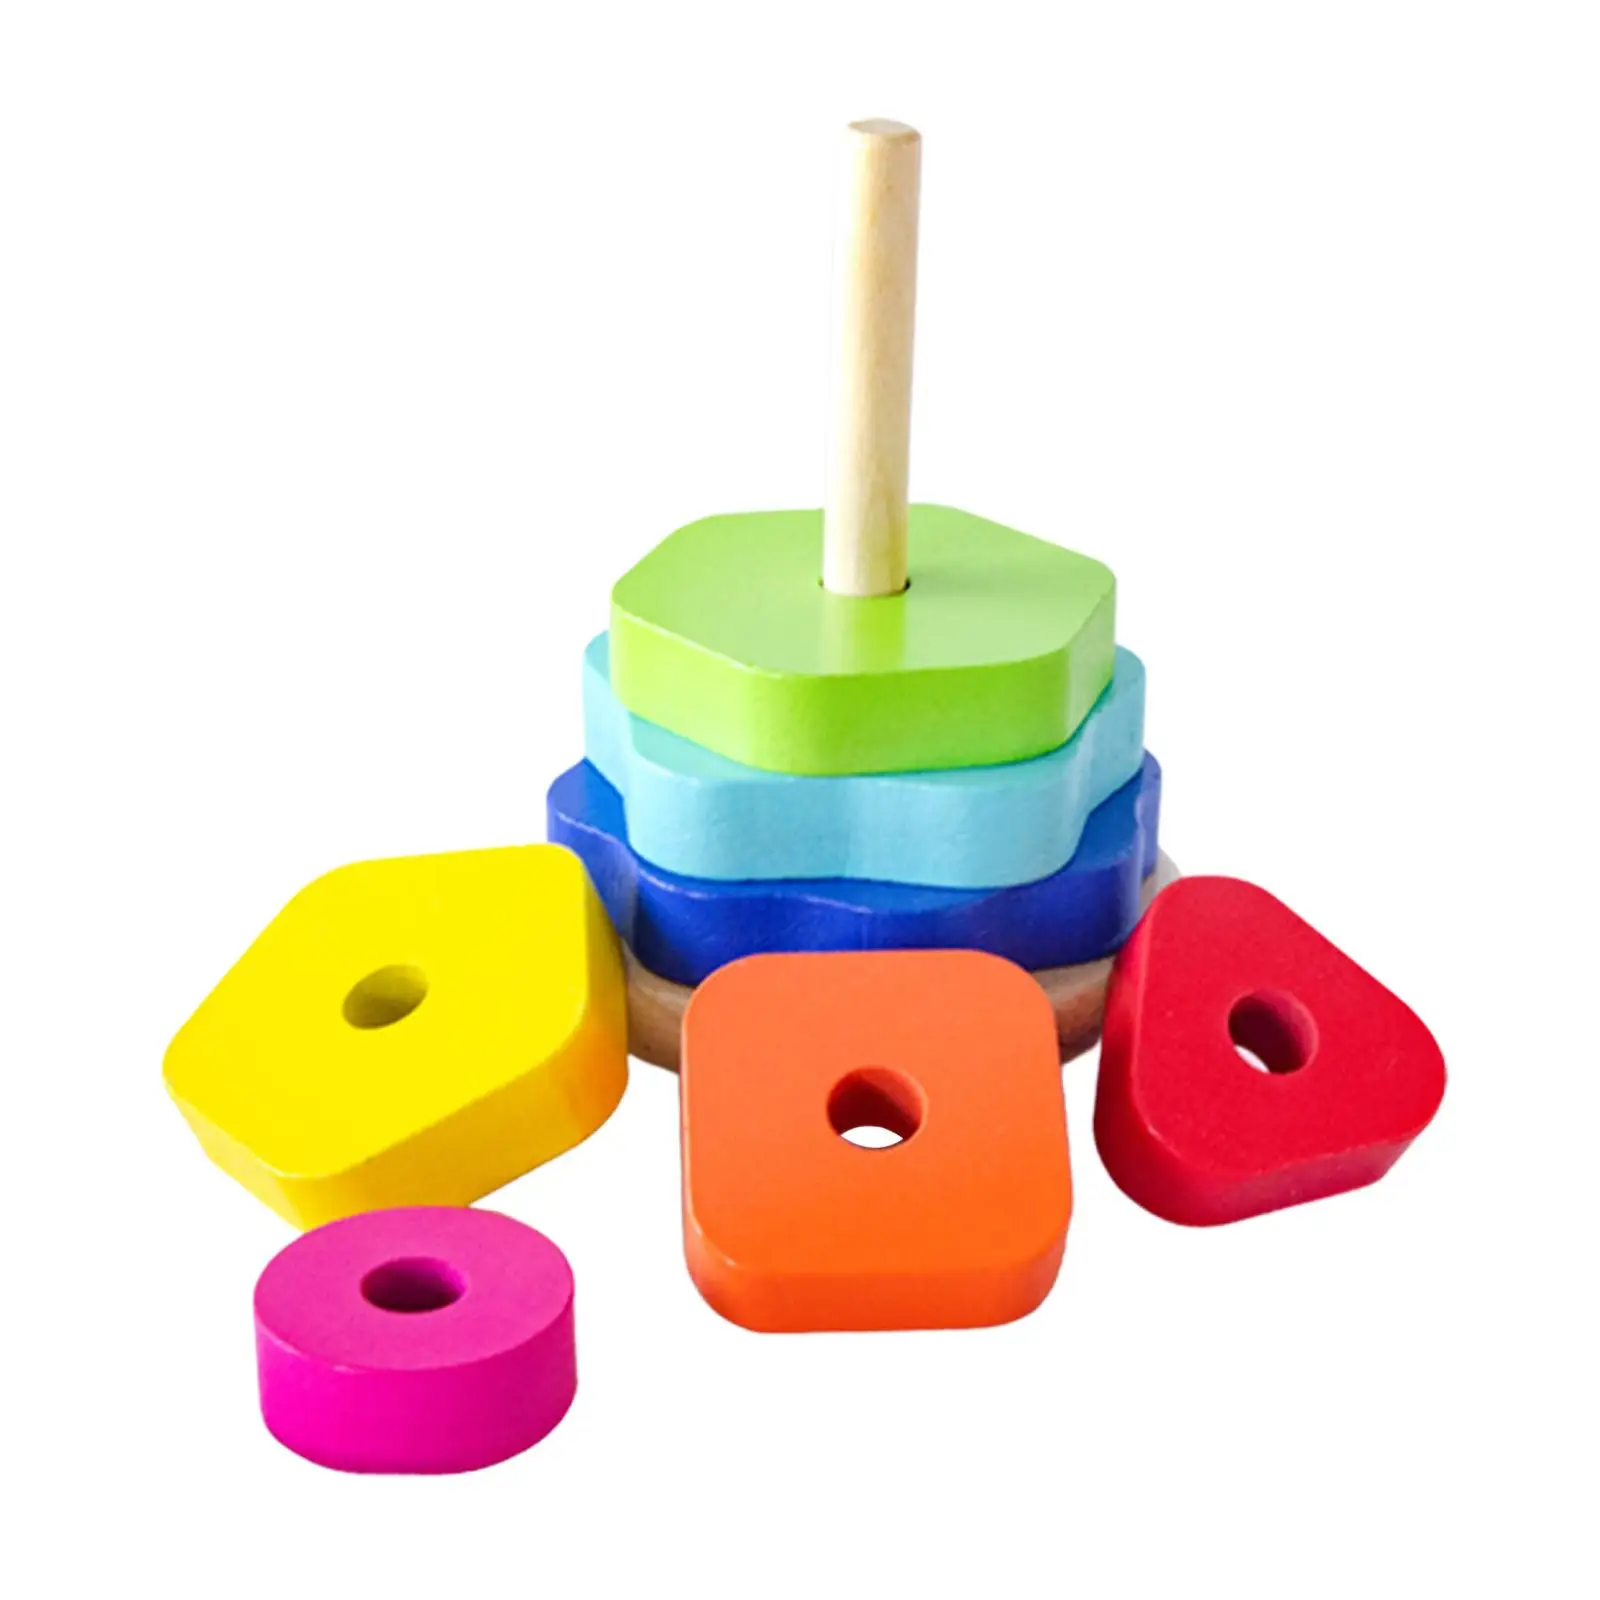 Colorful Stacking Tower Shape and Color Motor Skill Early Learning Wood Building Blocks for School Home Age 2+ Years Baby